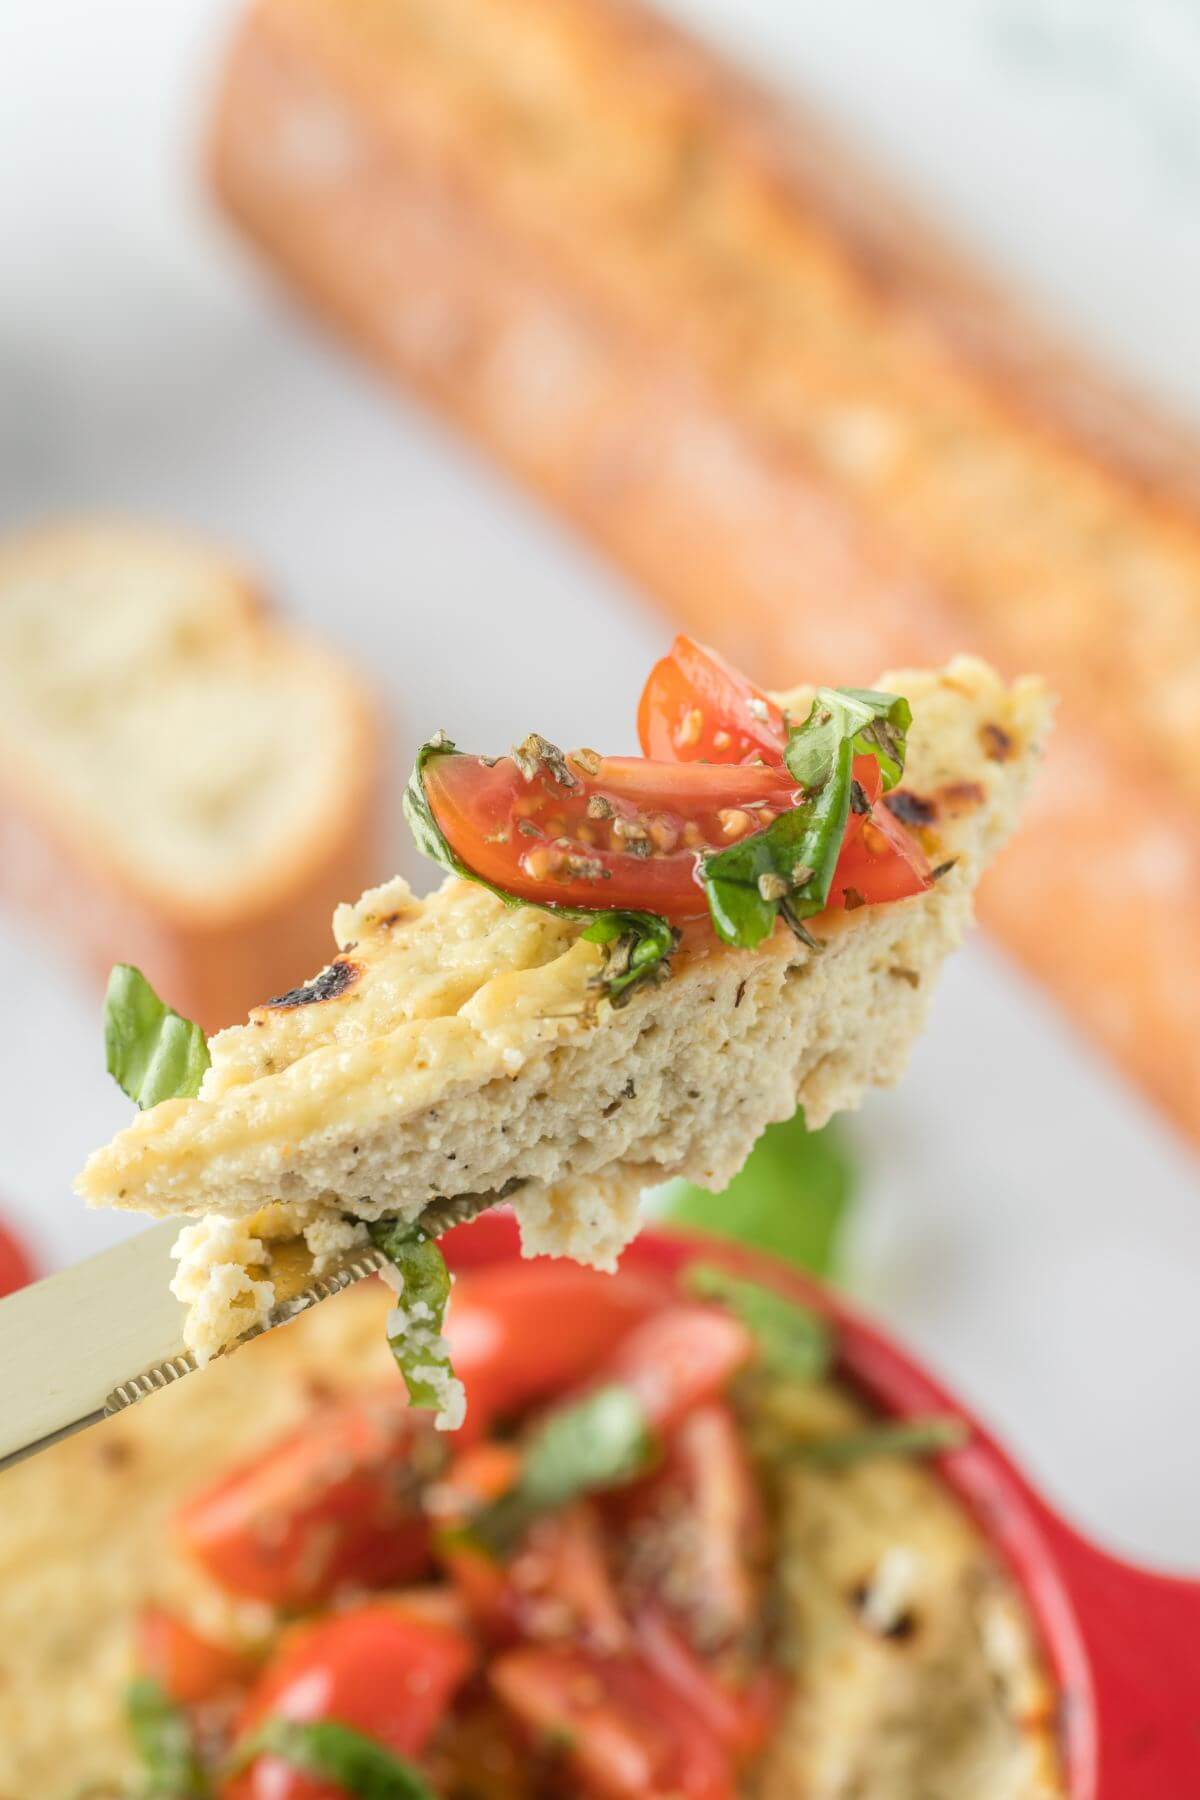 A bite of baked cheese dip and tomato herb mix sits on the end of a knife over the dish.